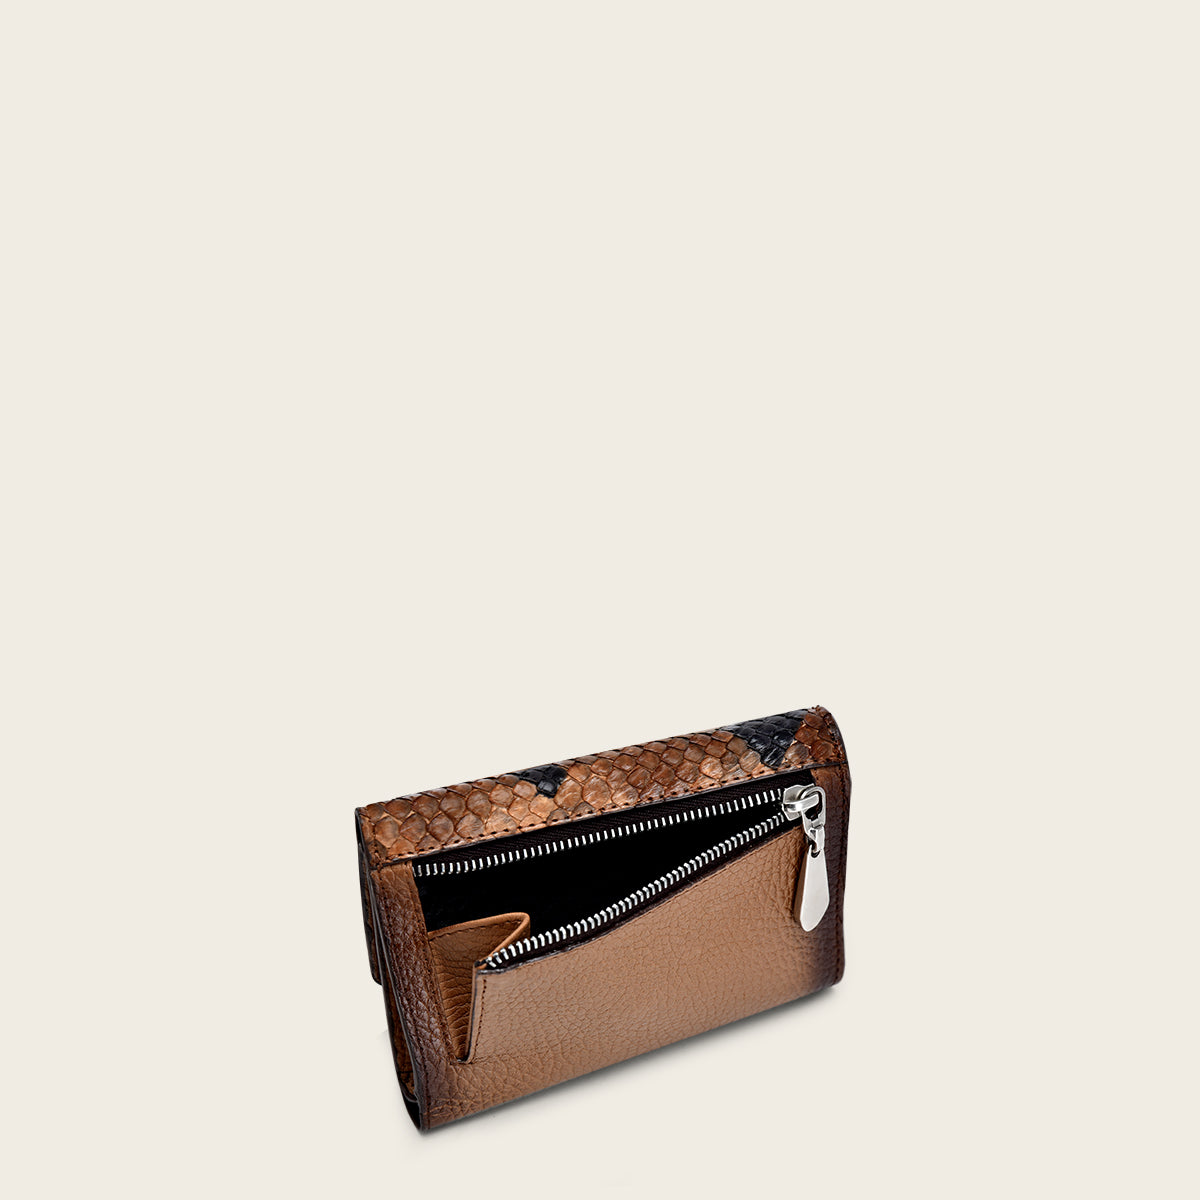 Brown exotic leather trifold wallet